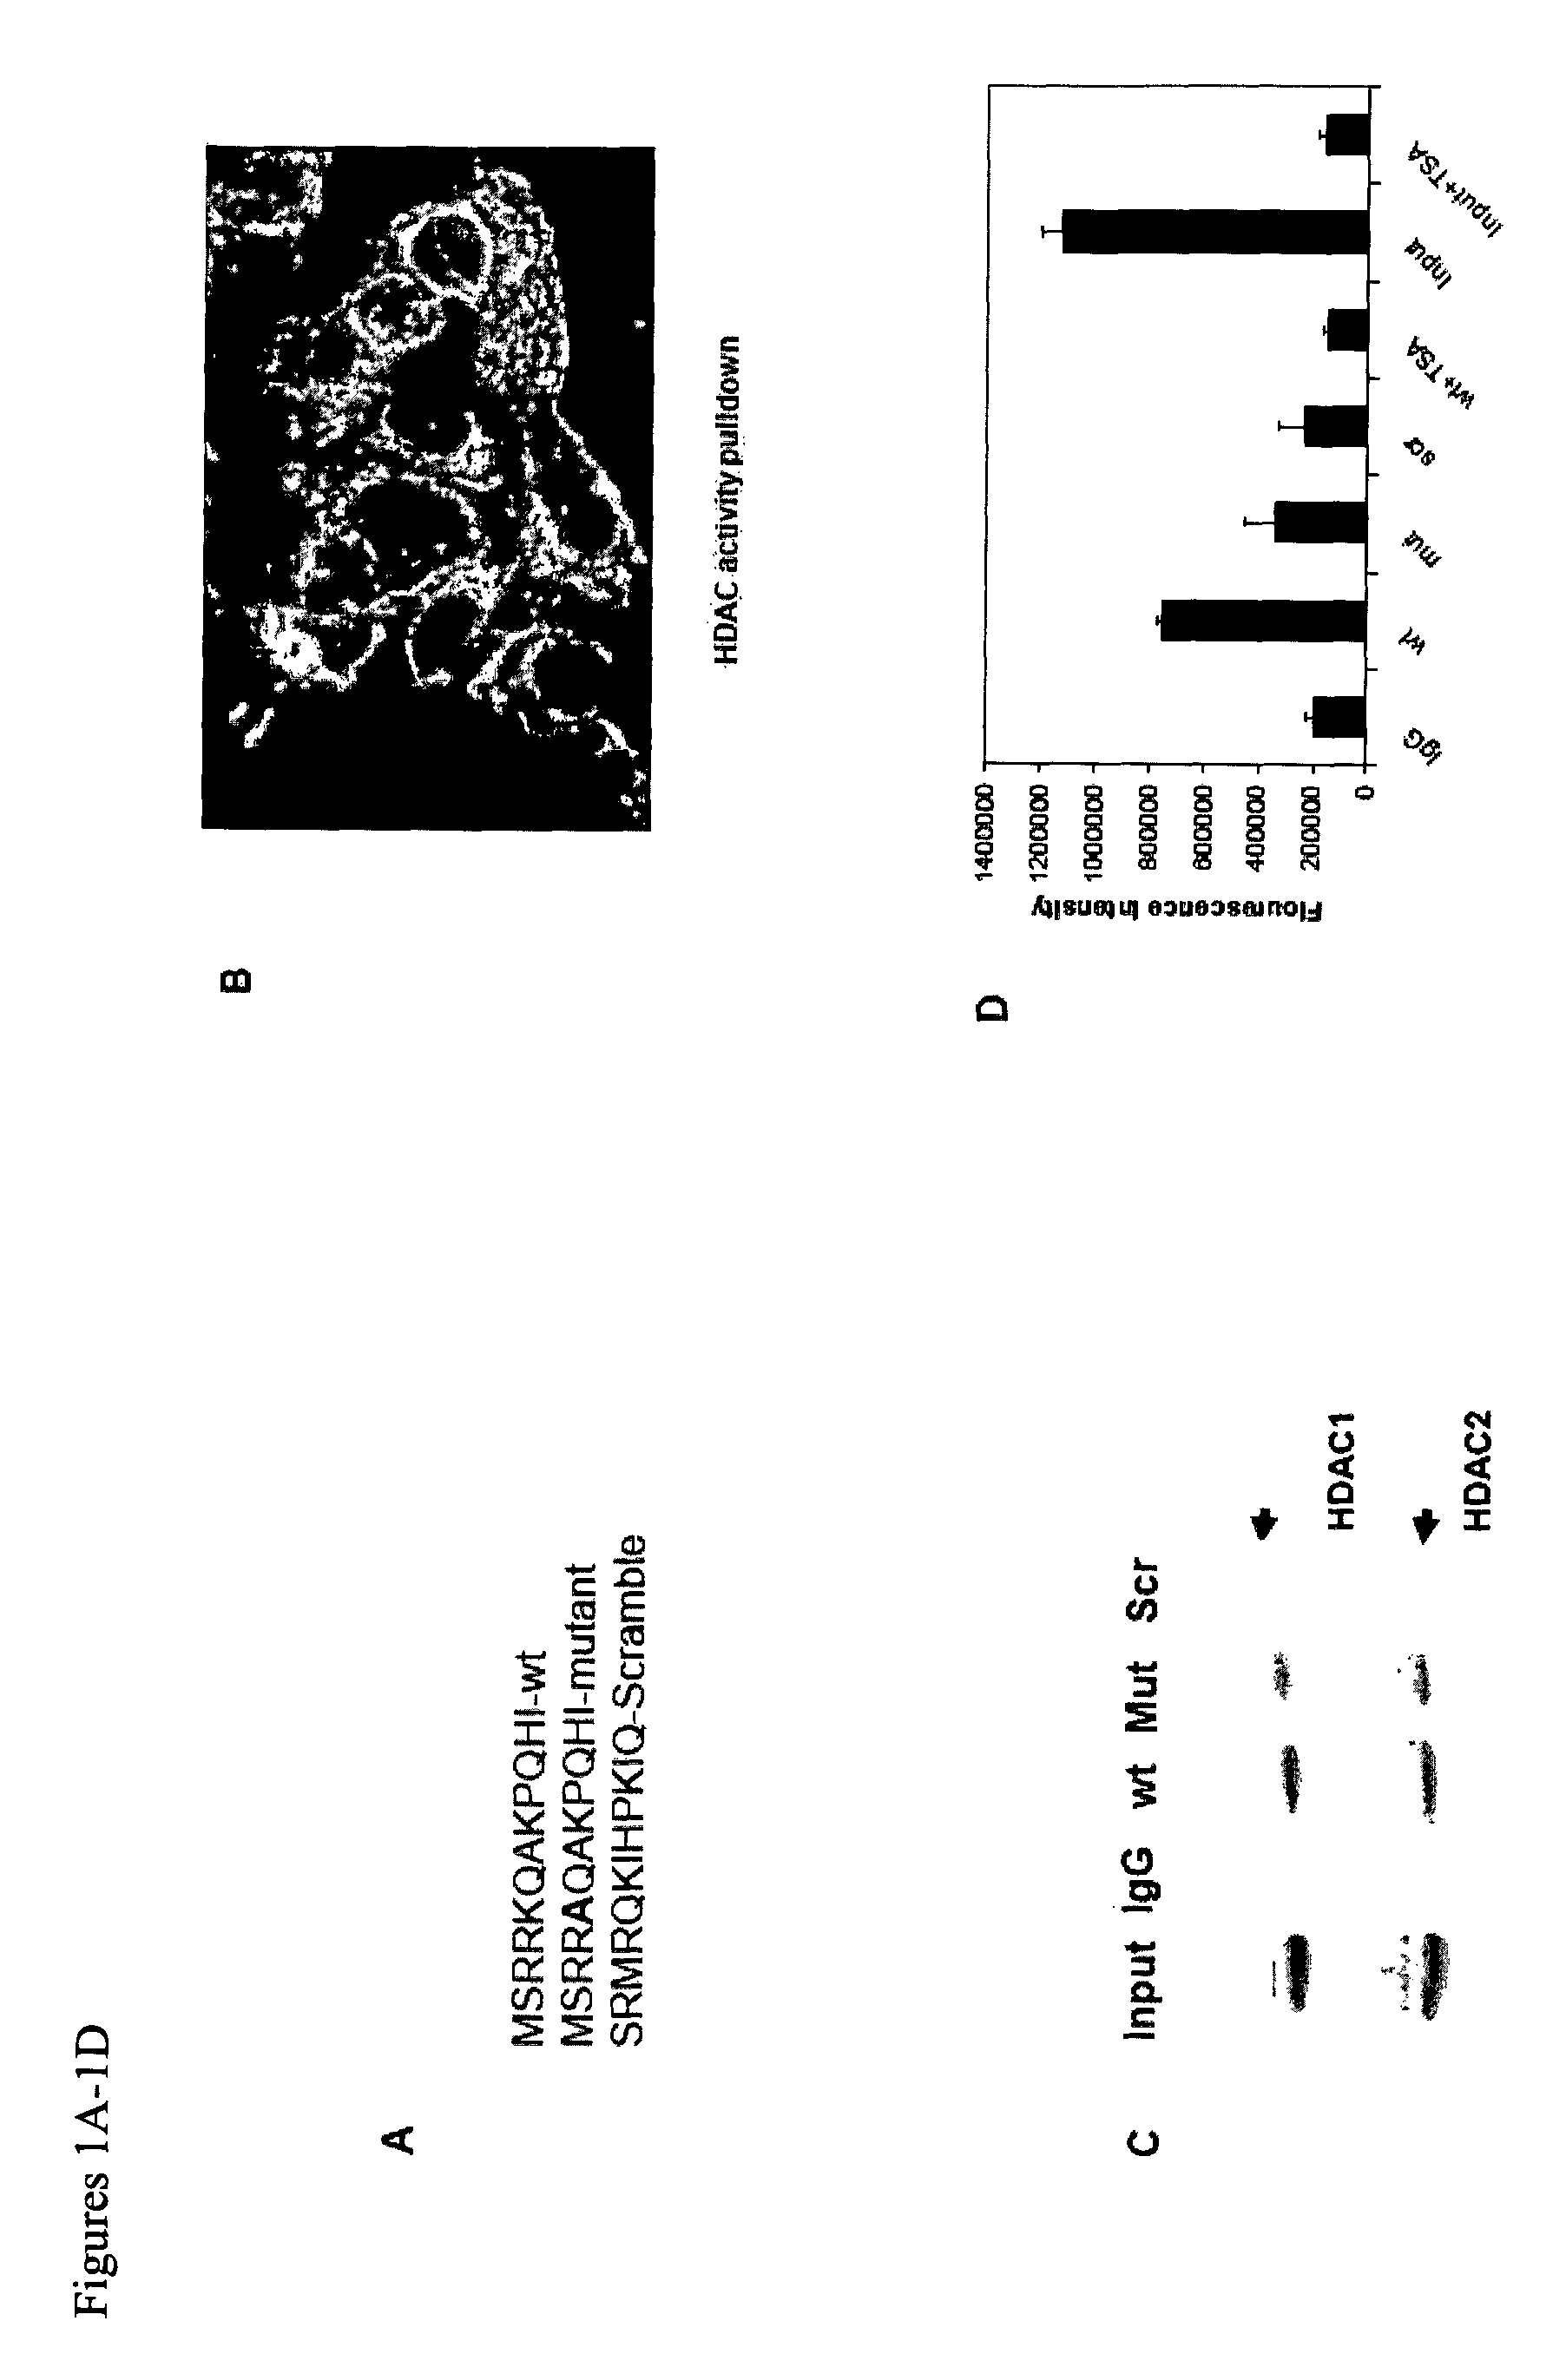 Spalt-like transcription factor 4 (SALL4) and uses thereof